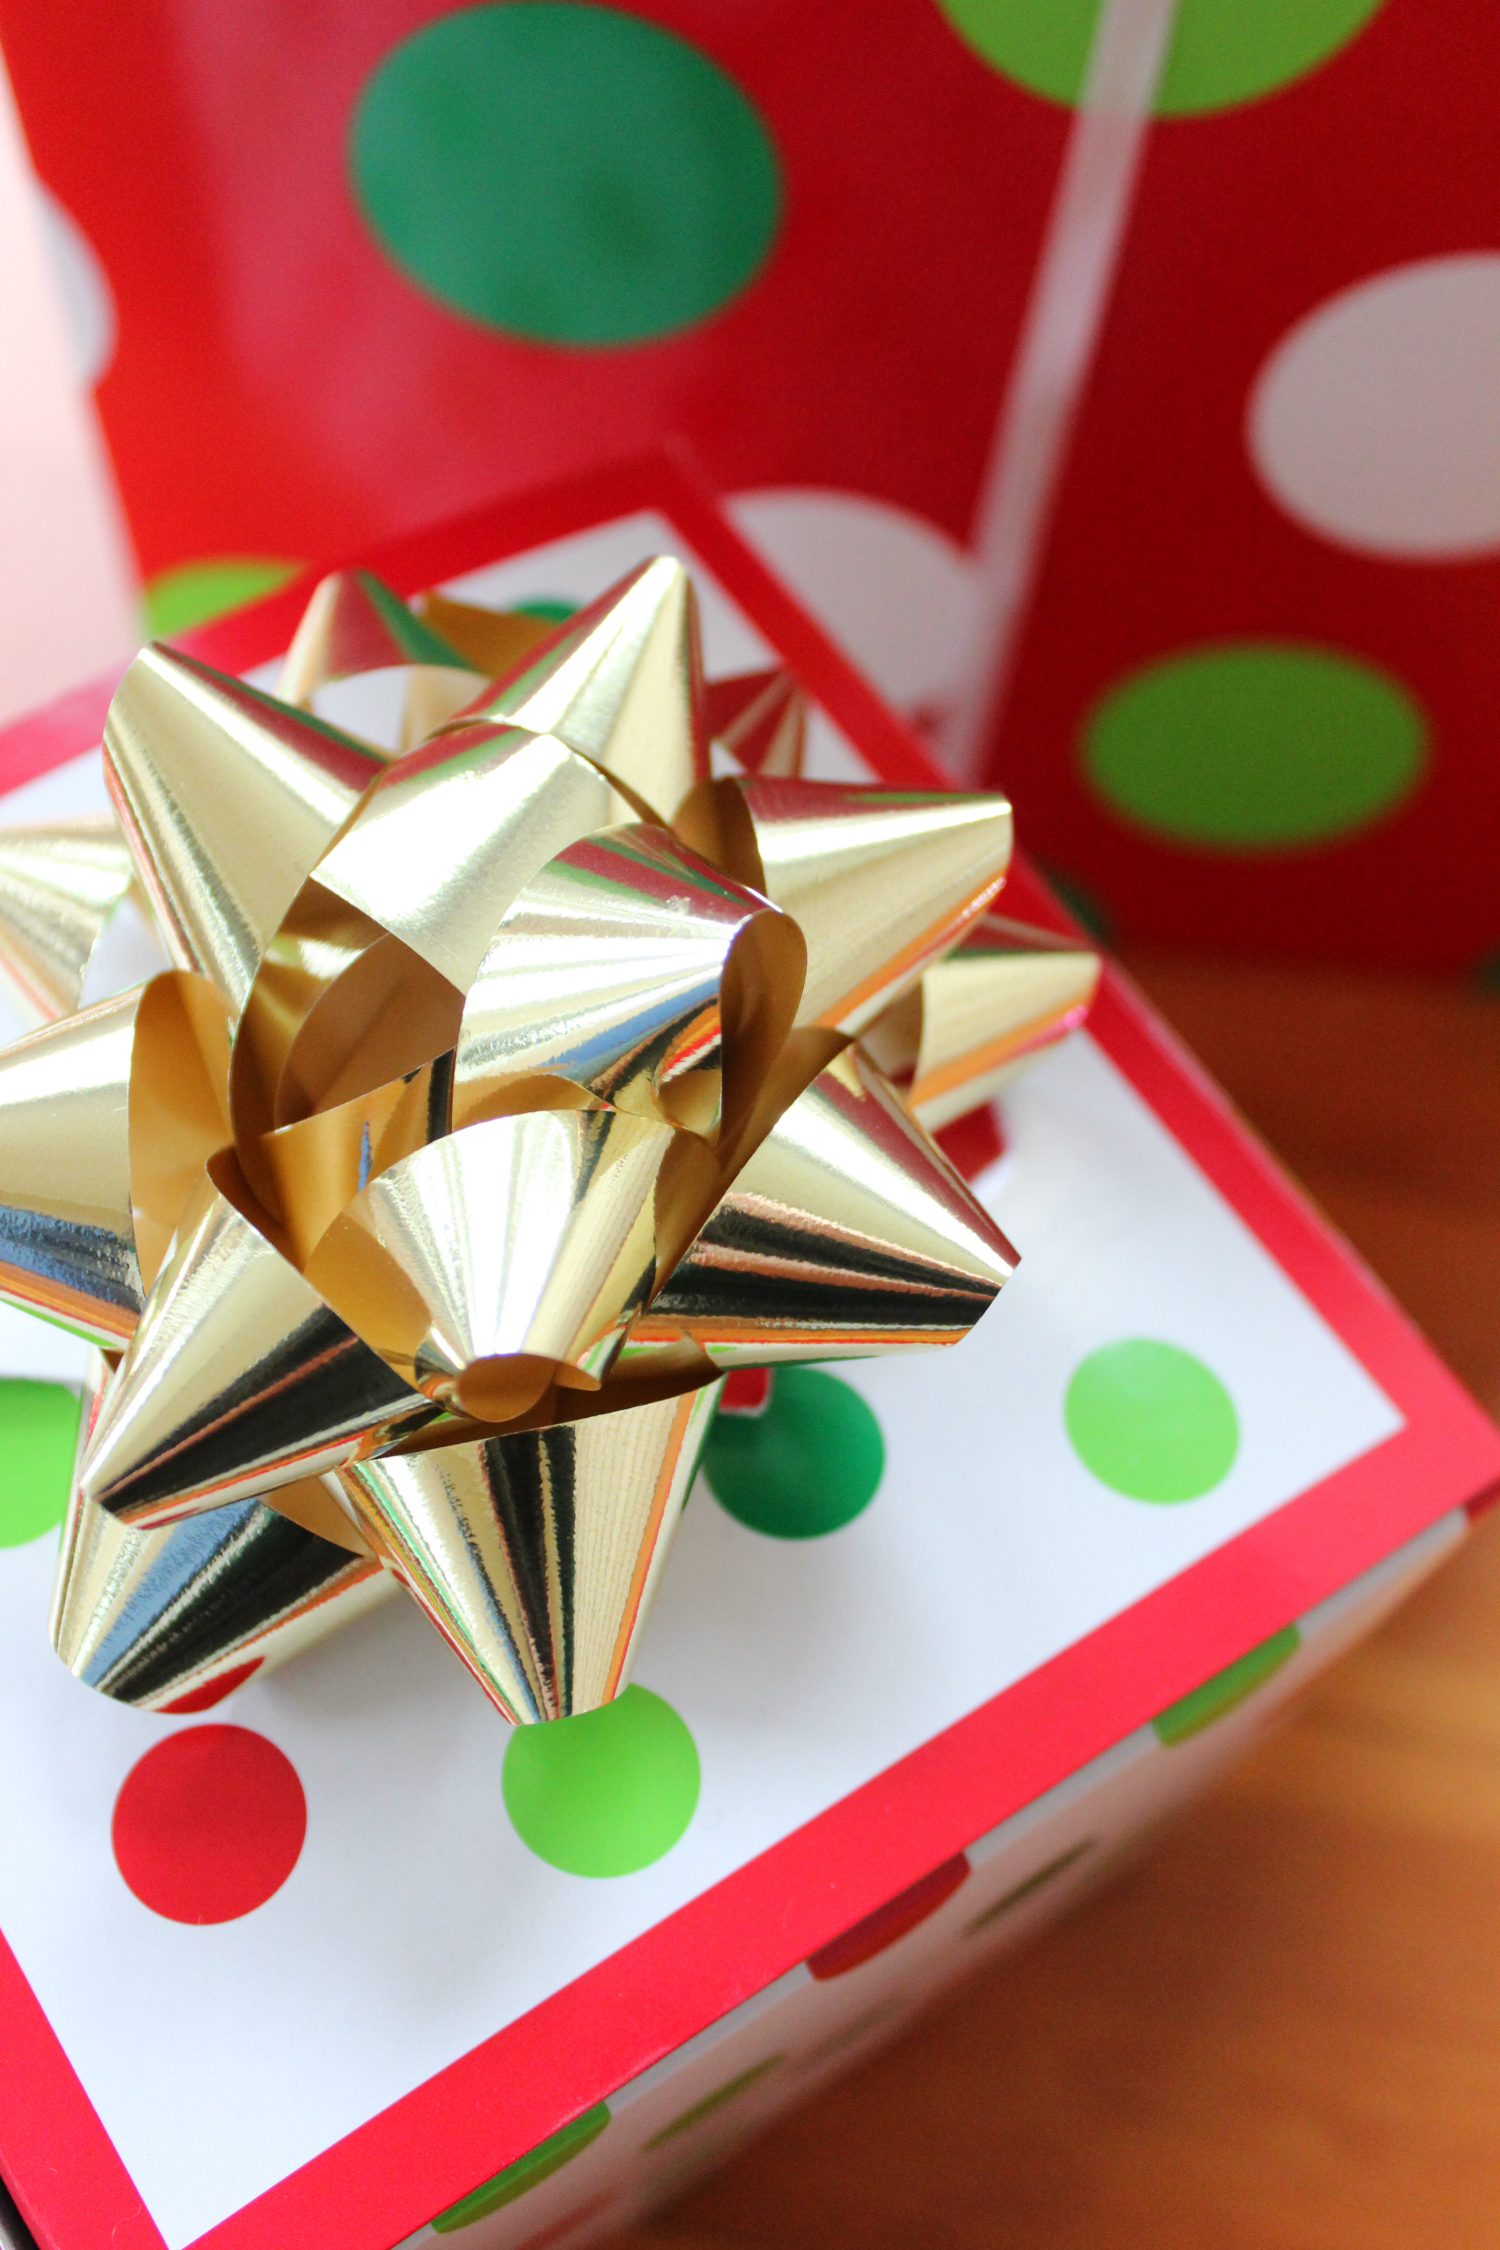 Quick and easy gift wrapping ideas from American Greetings